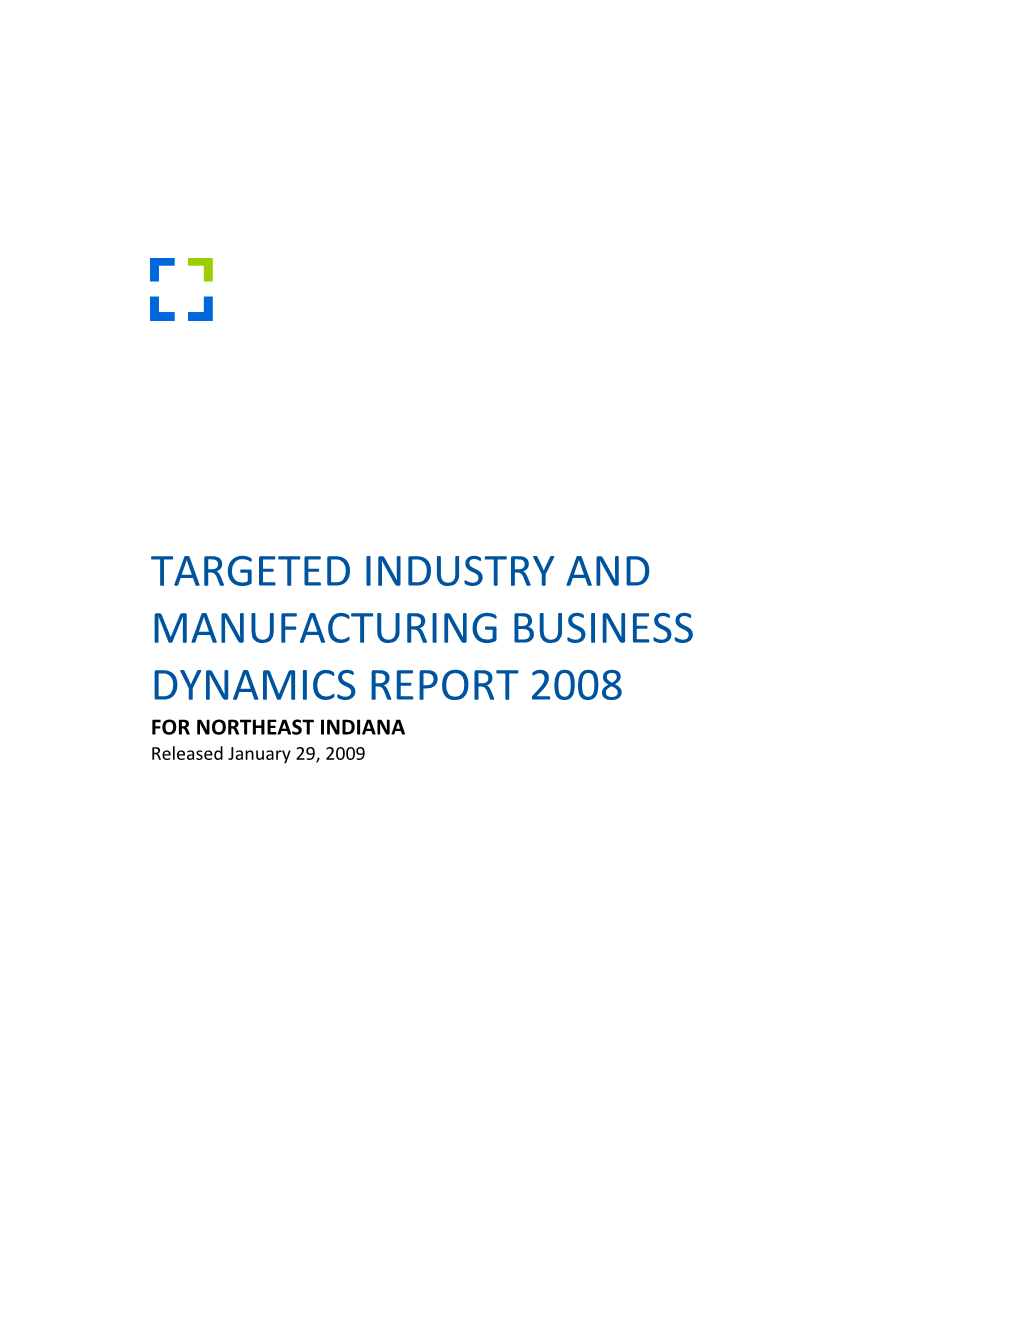 Targeted Industry and Manufacturing